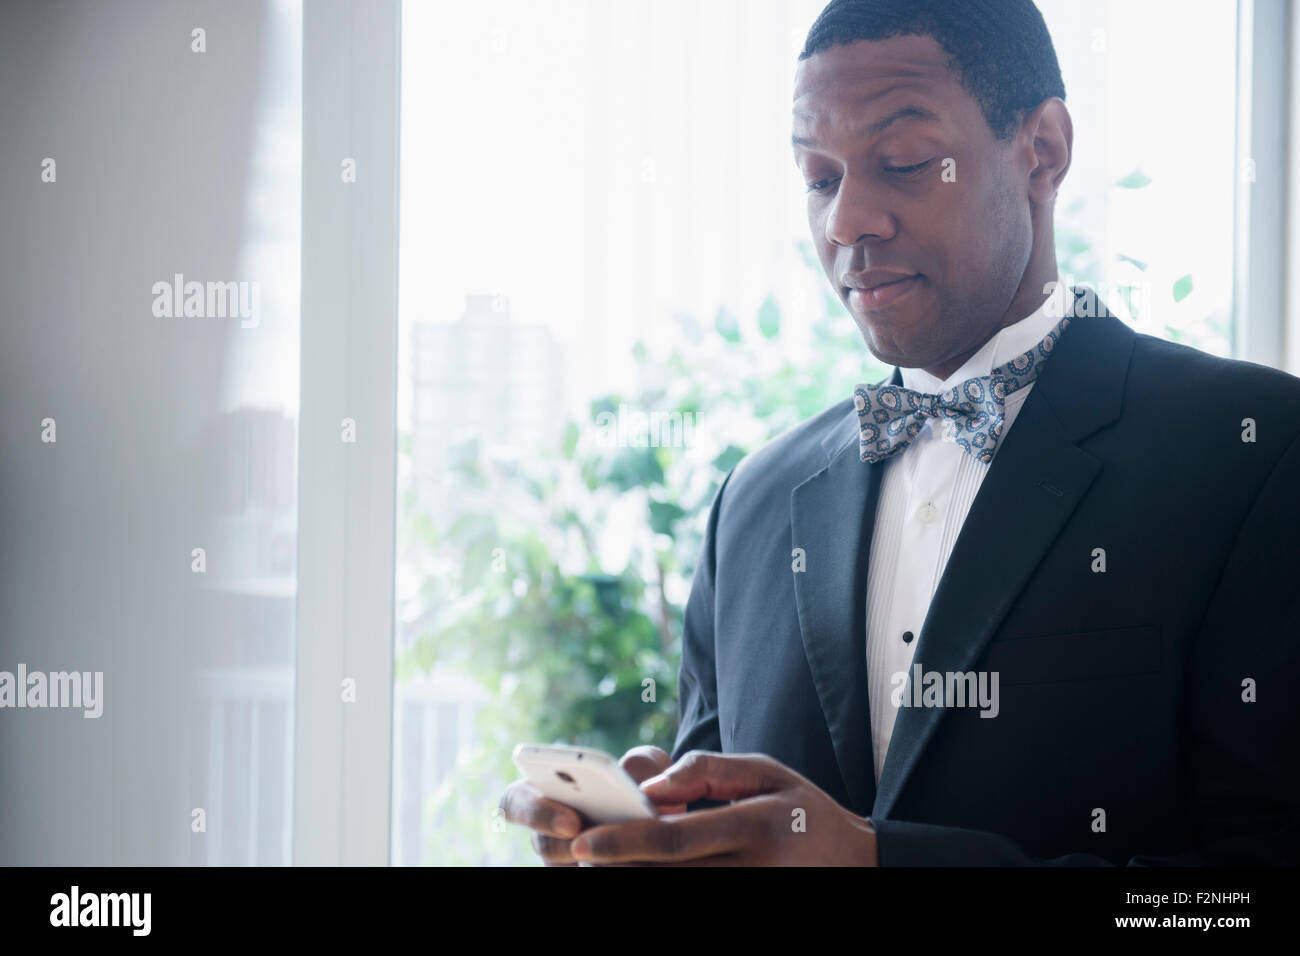 Groom in tuxedo using cell phone Banque D'Images